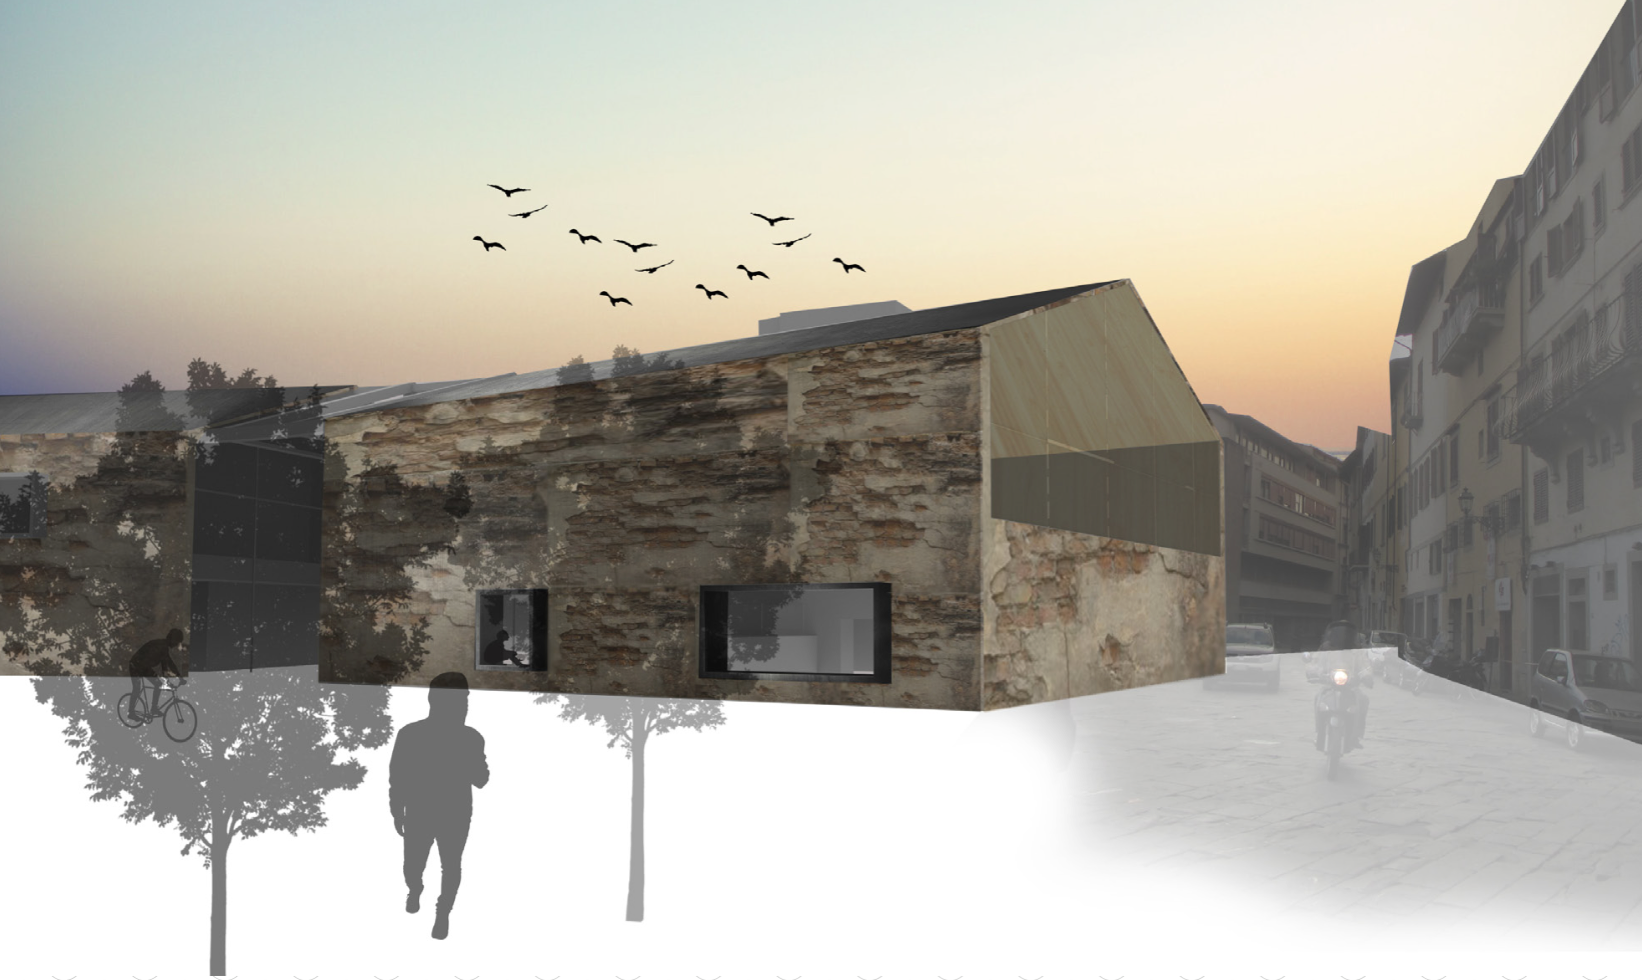 Spring 2015 Most Inspiring Students' Projects competition. Student: Cayla Walter (Architecture).